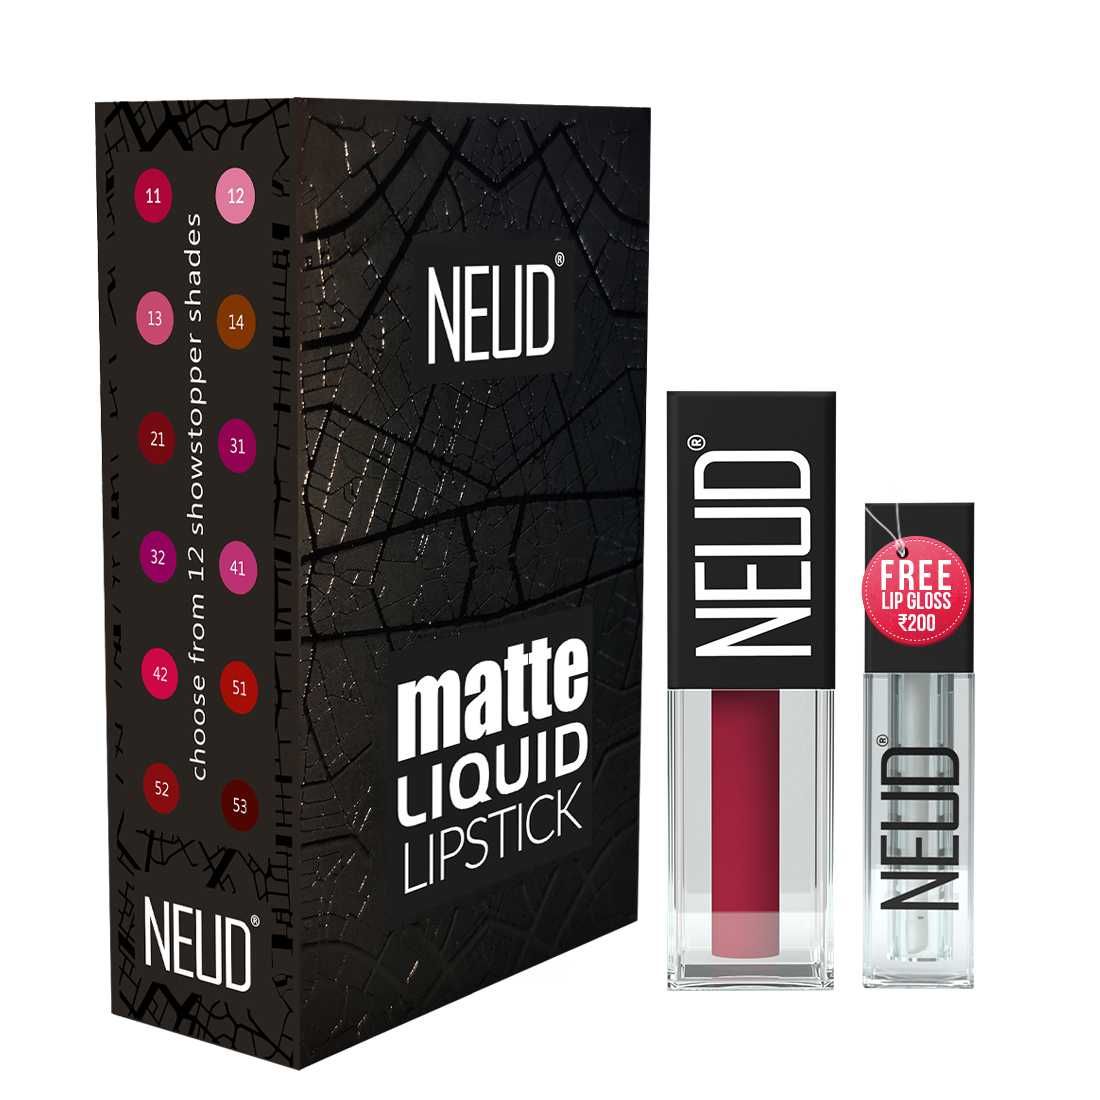 Buy NEUD Matte Liquid Lipstick Peachy Pink with Jojoba Oil, Vitamin E and Almond Oil - Smudge Proof 12-hour Stay Formula with Free Lip Gloss - Purplle